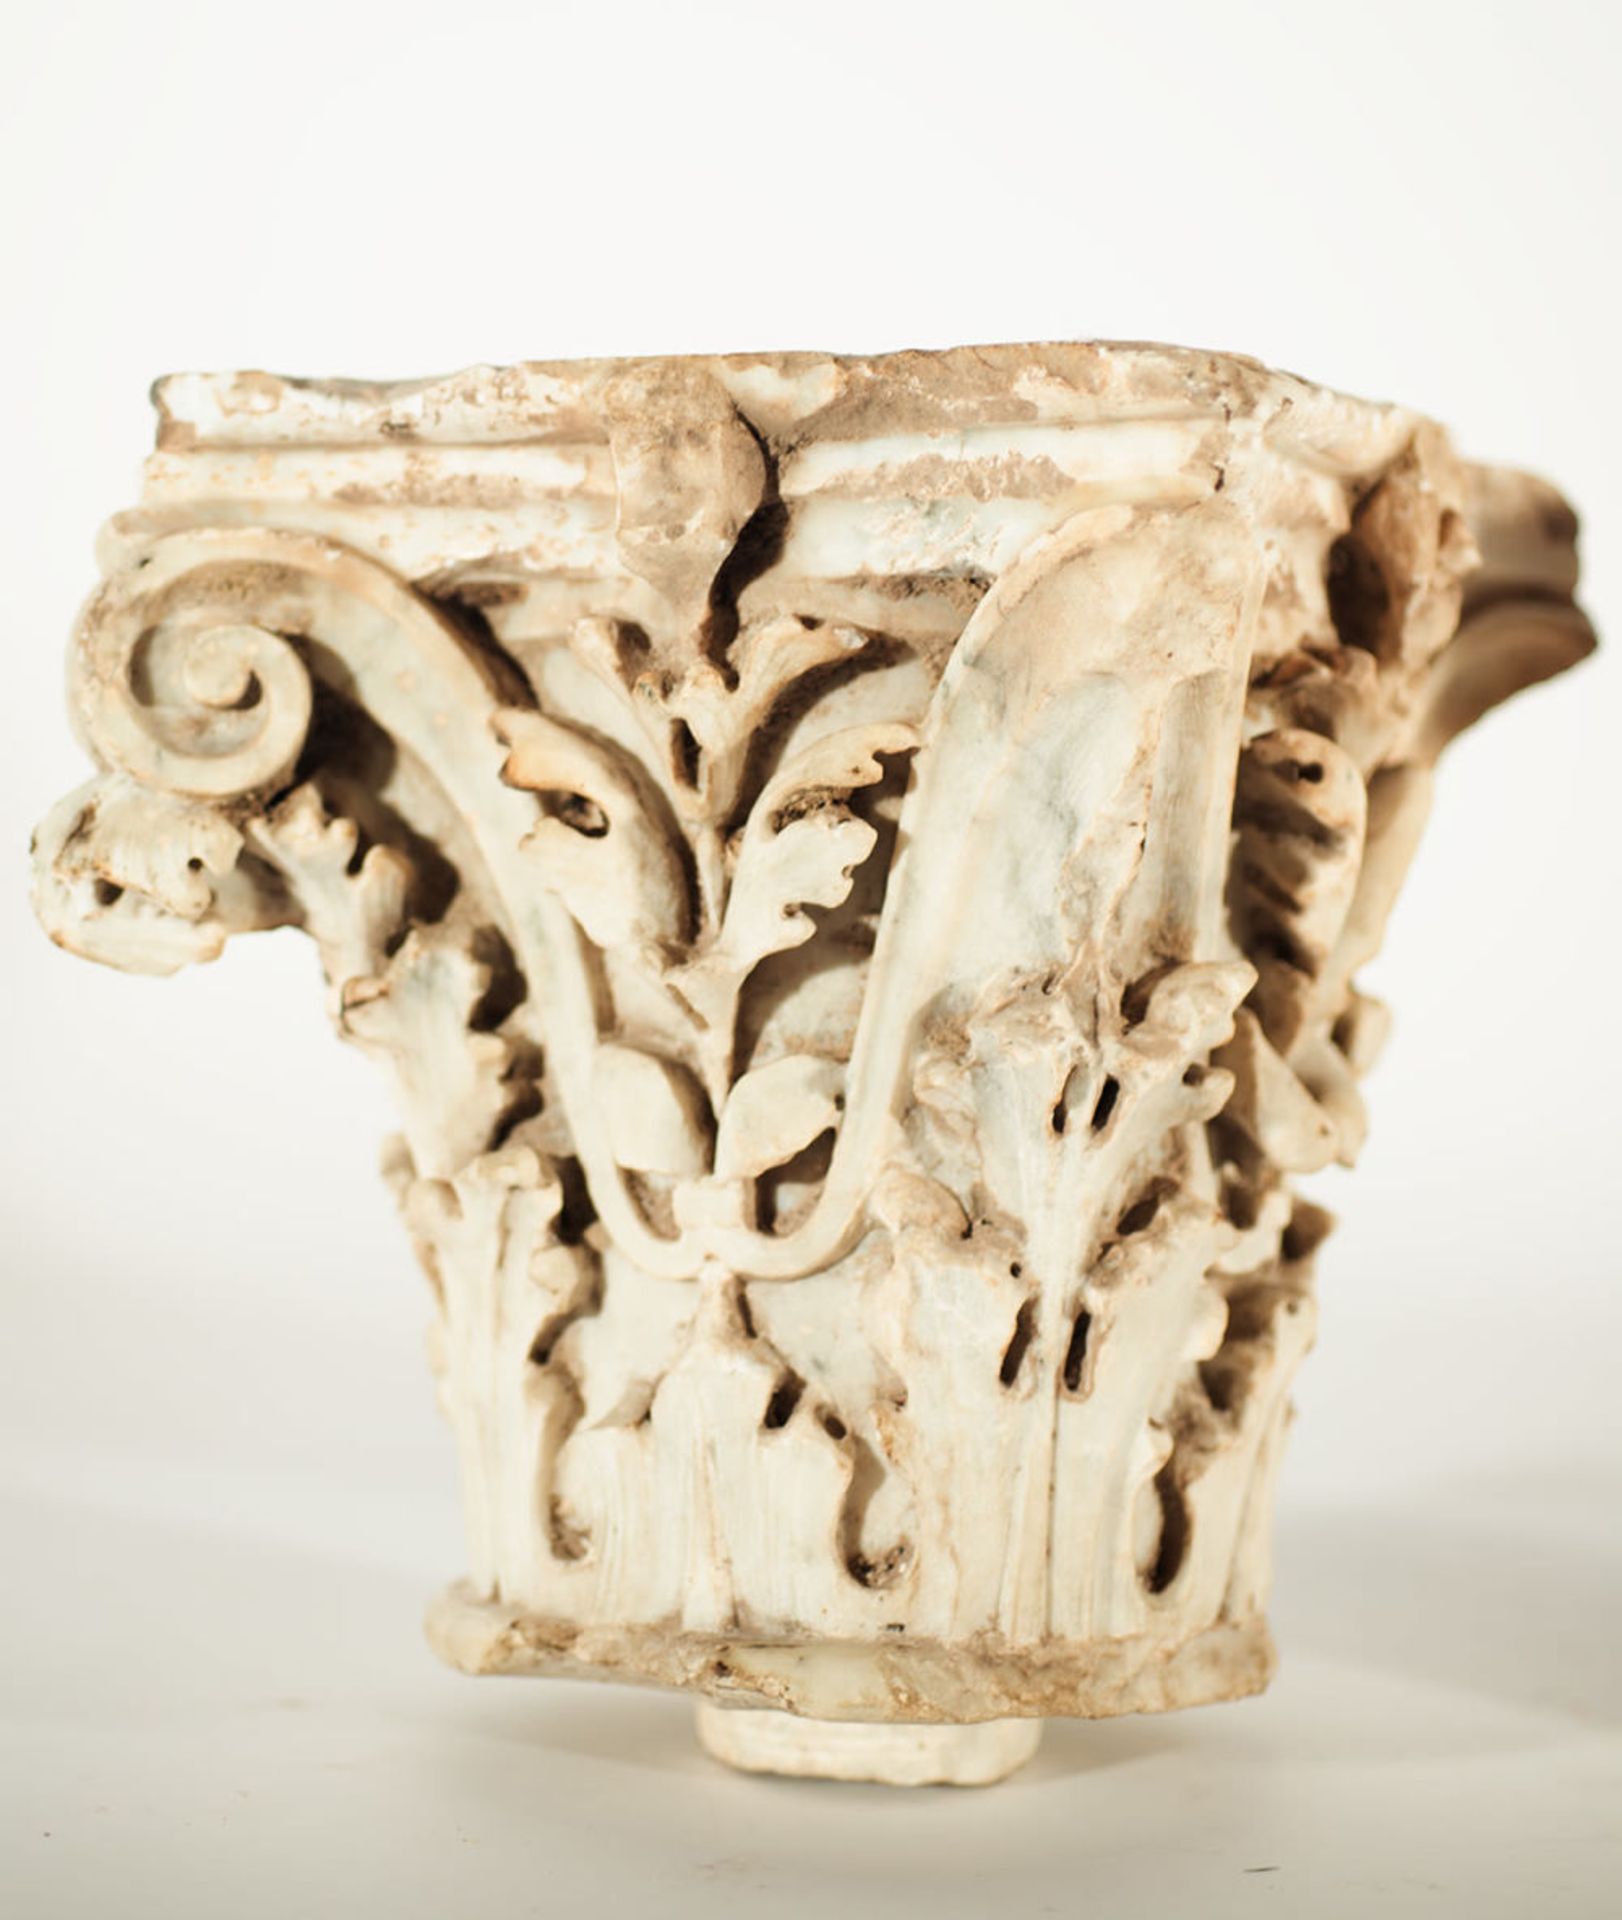 Magnificent Pair of Corinthian Capitals, possibly Roman Empire, Flavian period, 2nd - 3rd century AD - Image 3 of 4